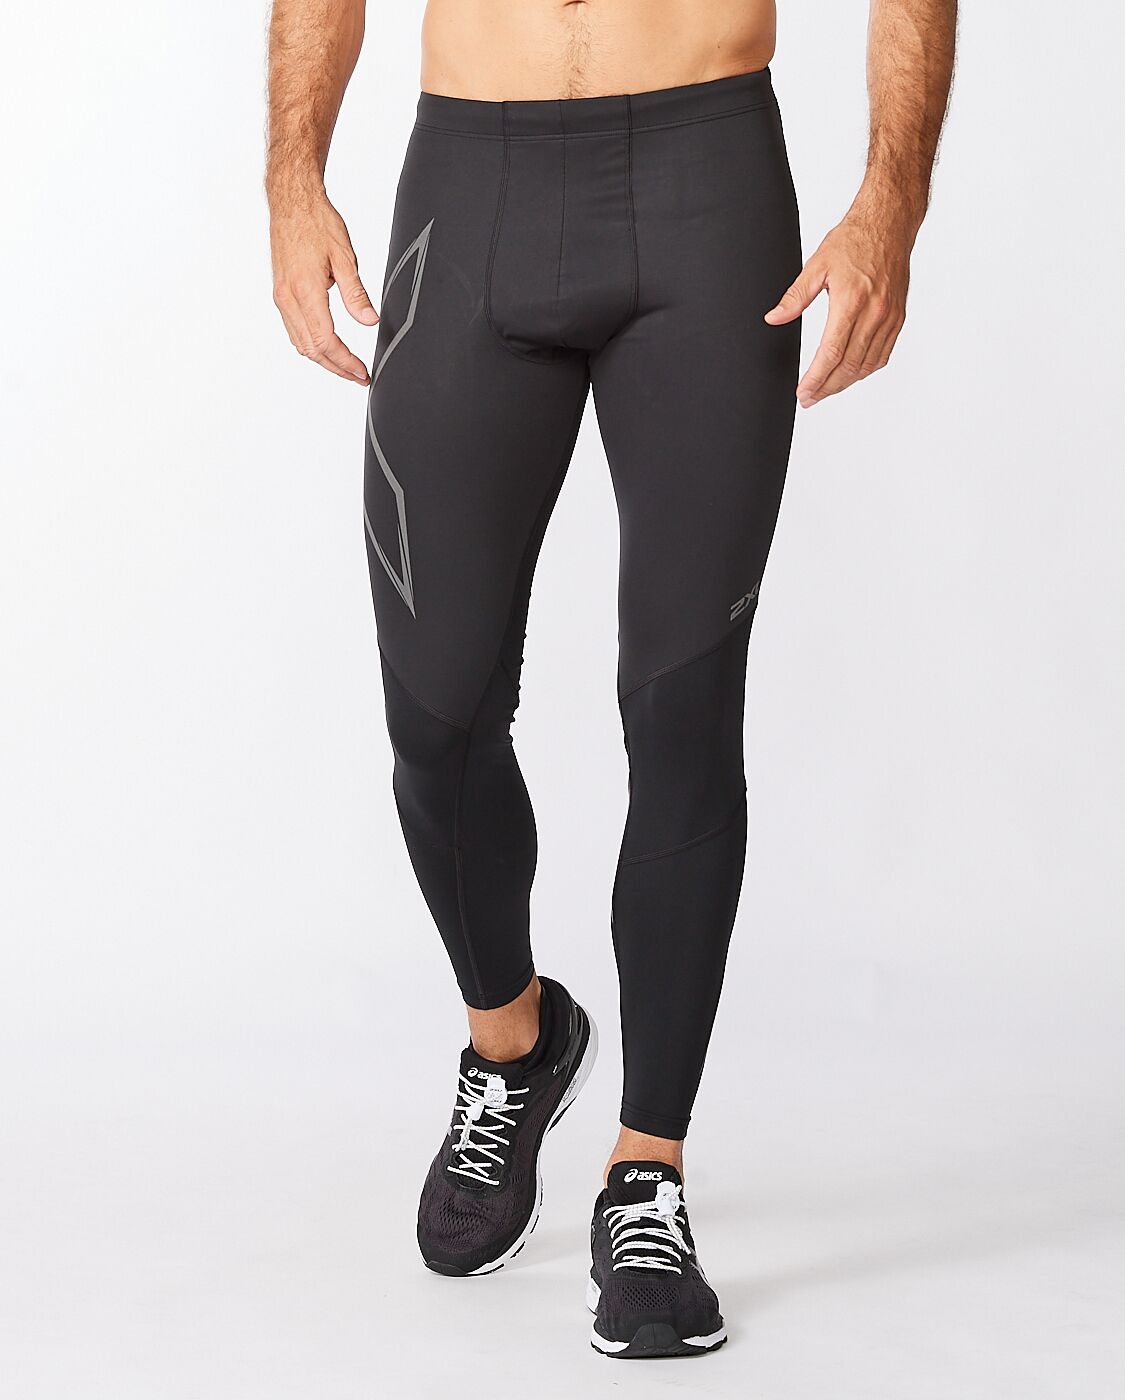 alkove Anholdelse tyve Ignition Shield Compression Tights Herre – 2XU